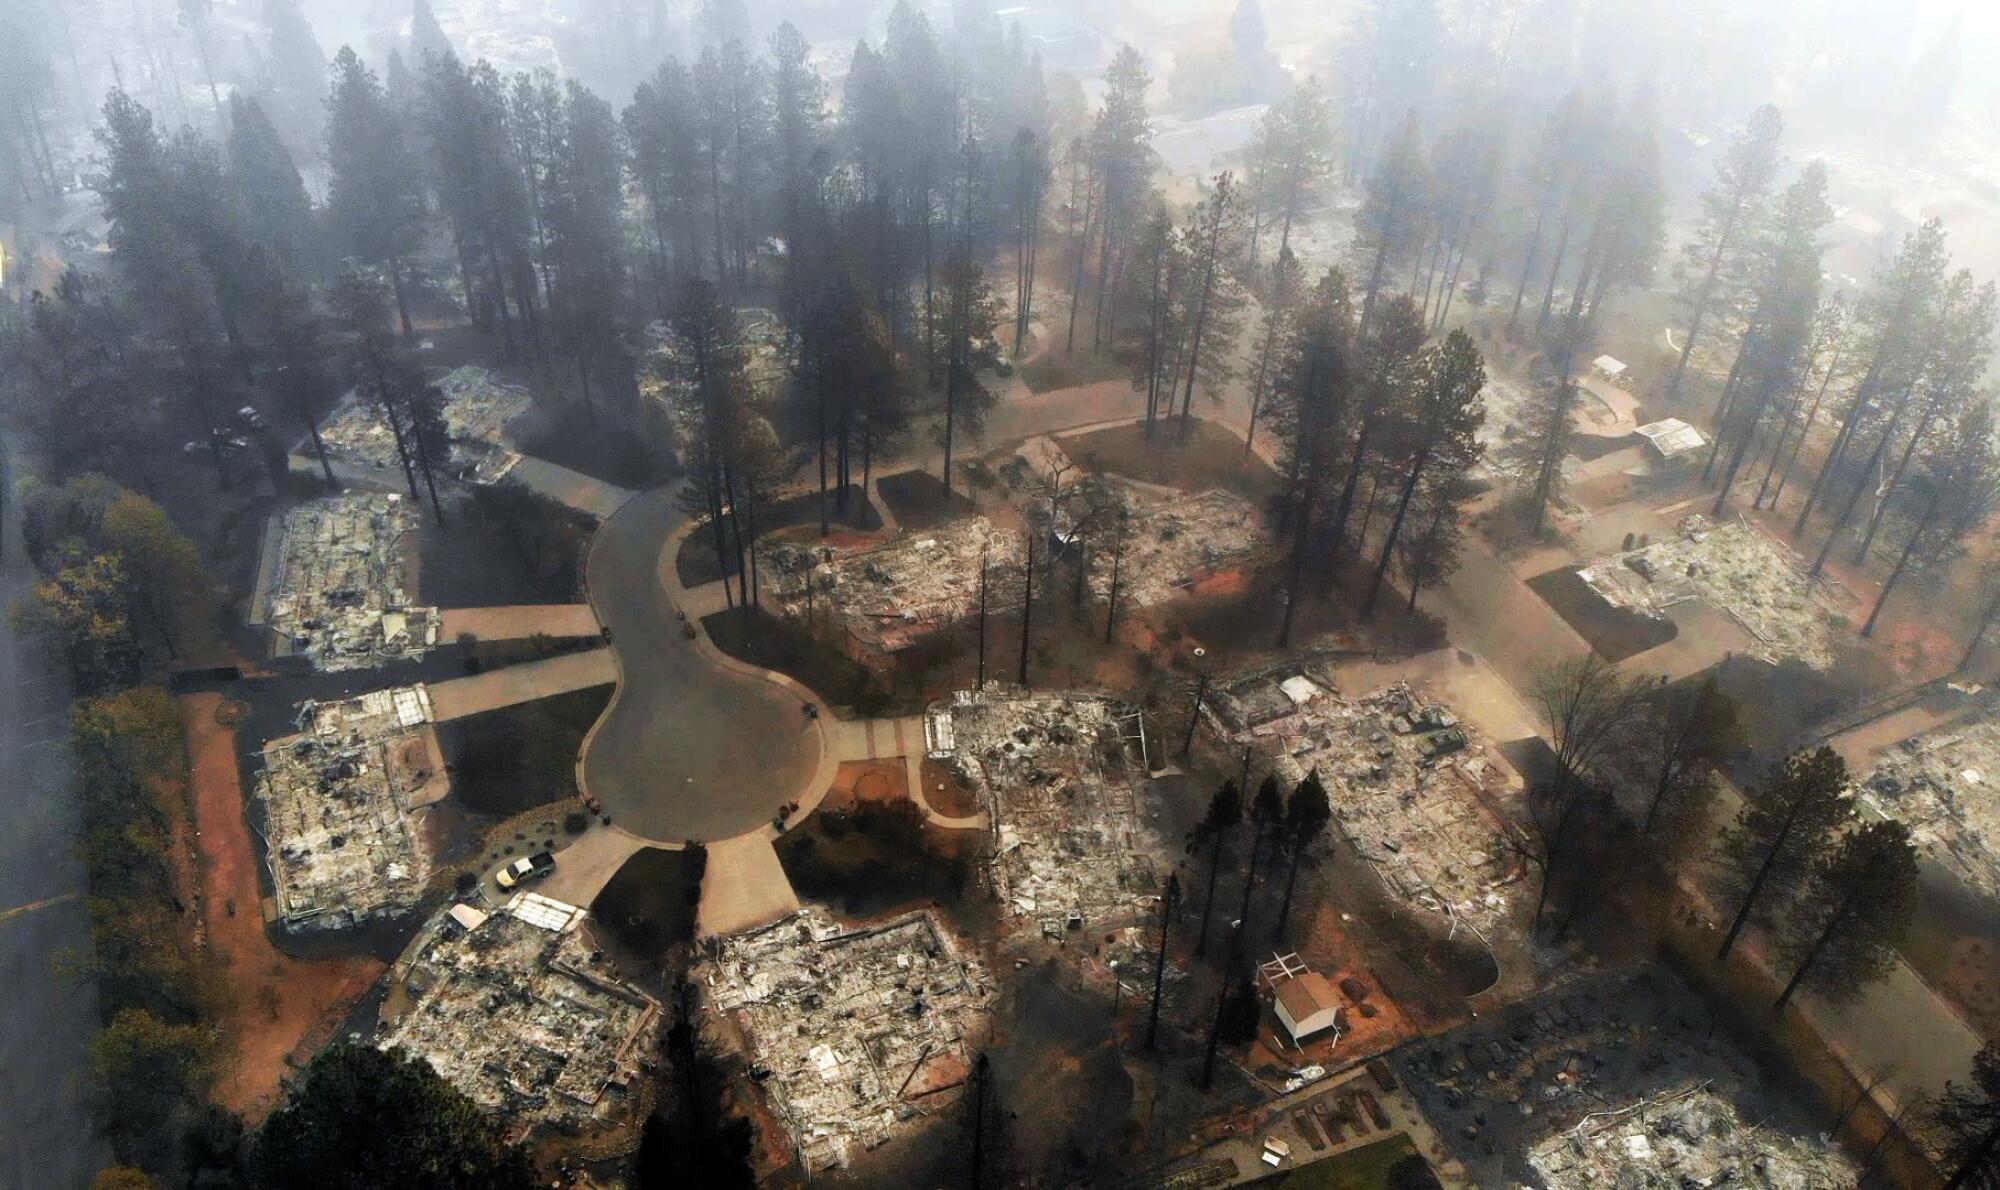 Ash-covered foundations of incinerated homes ring a cul-de-sac lined by unburned pines.